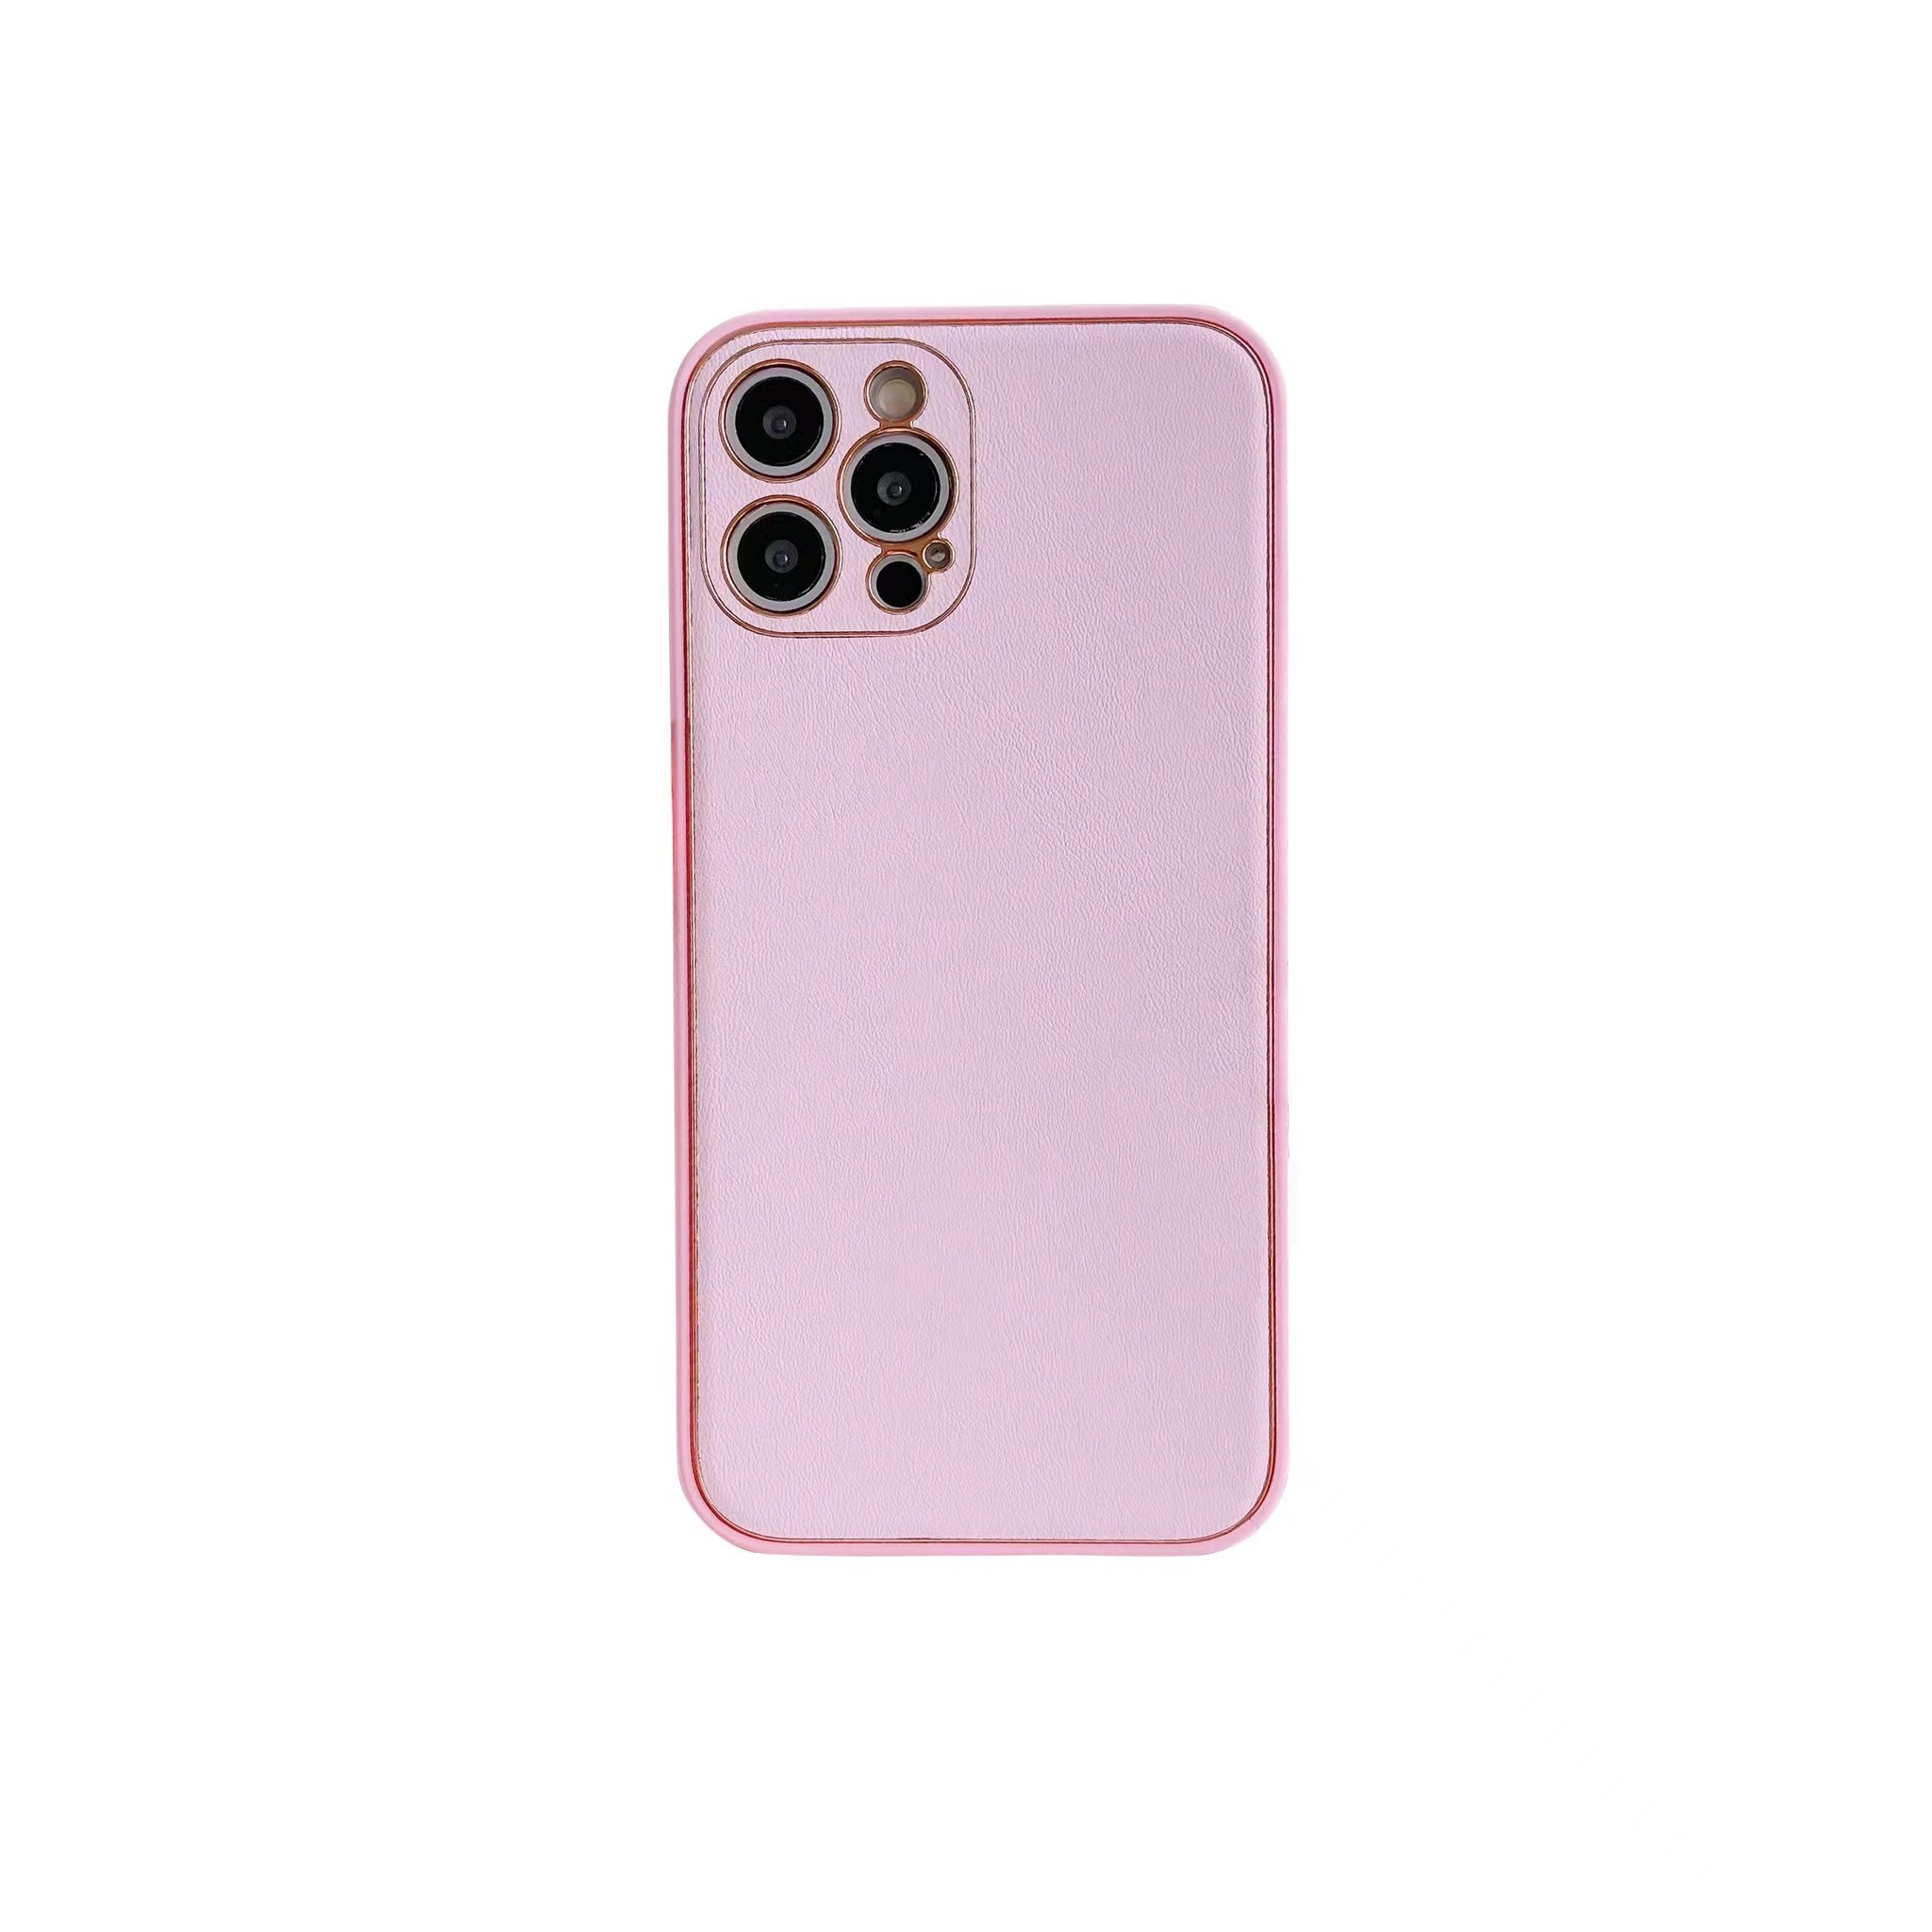 iPhone 12 Pro Max Back Cover Hoesje - leer - Luxe - Backcover - Apple iPhone 12 Pro Max - Roze/Goud